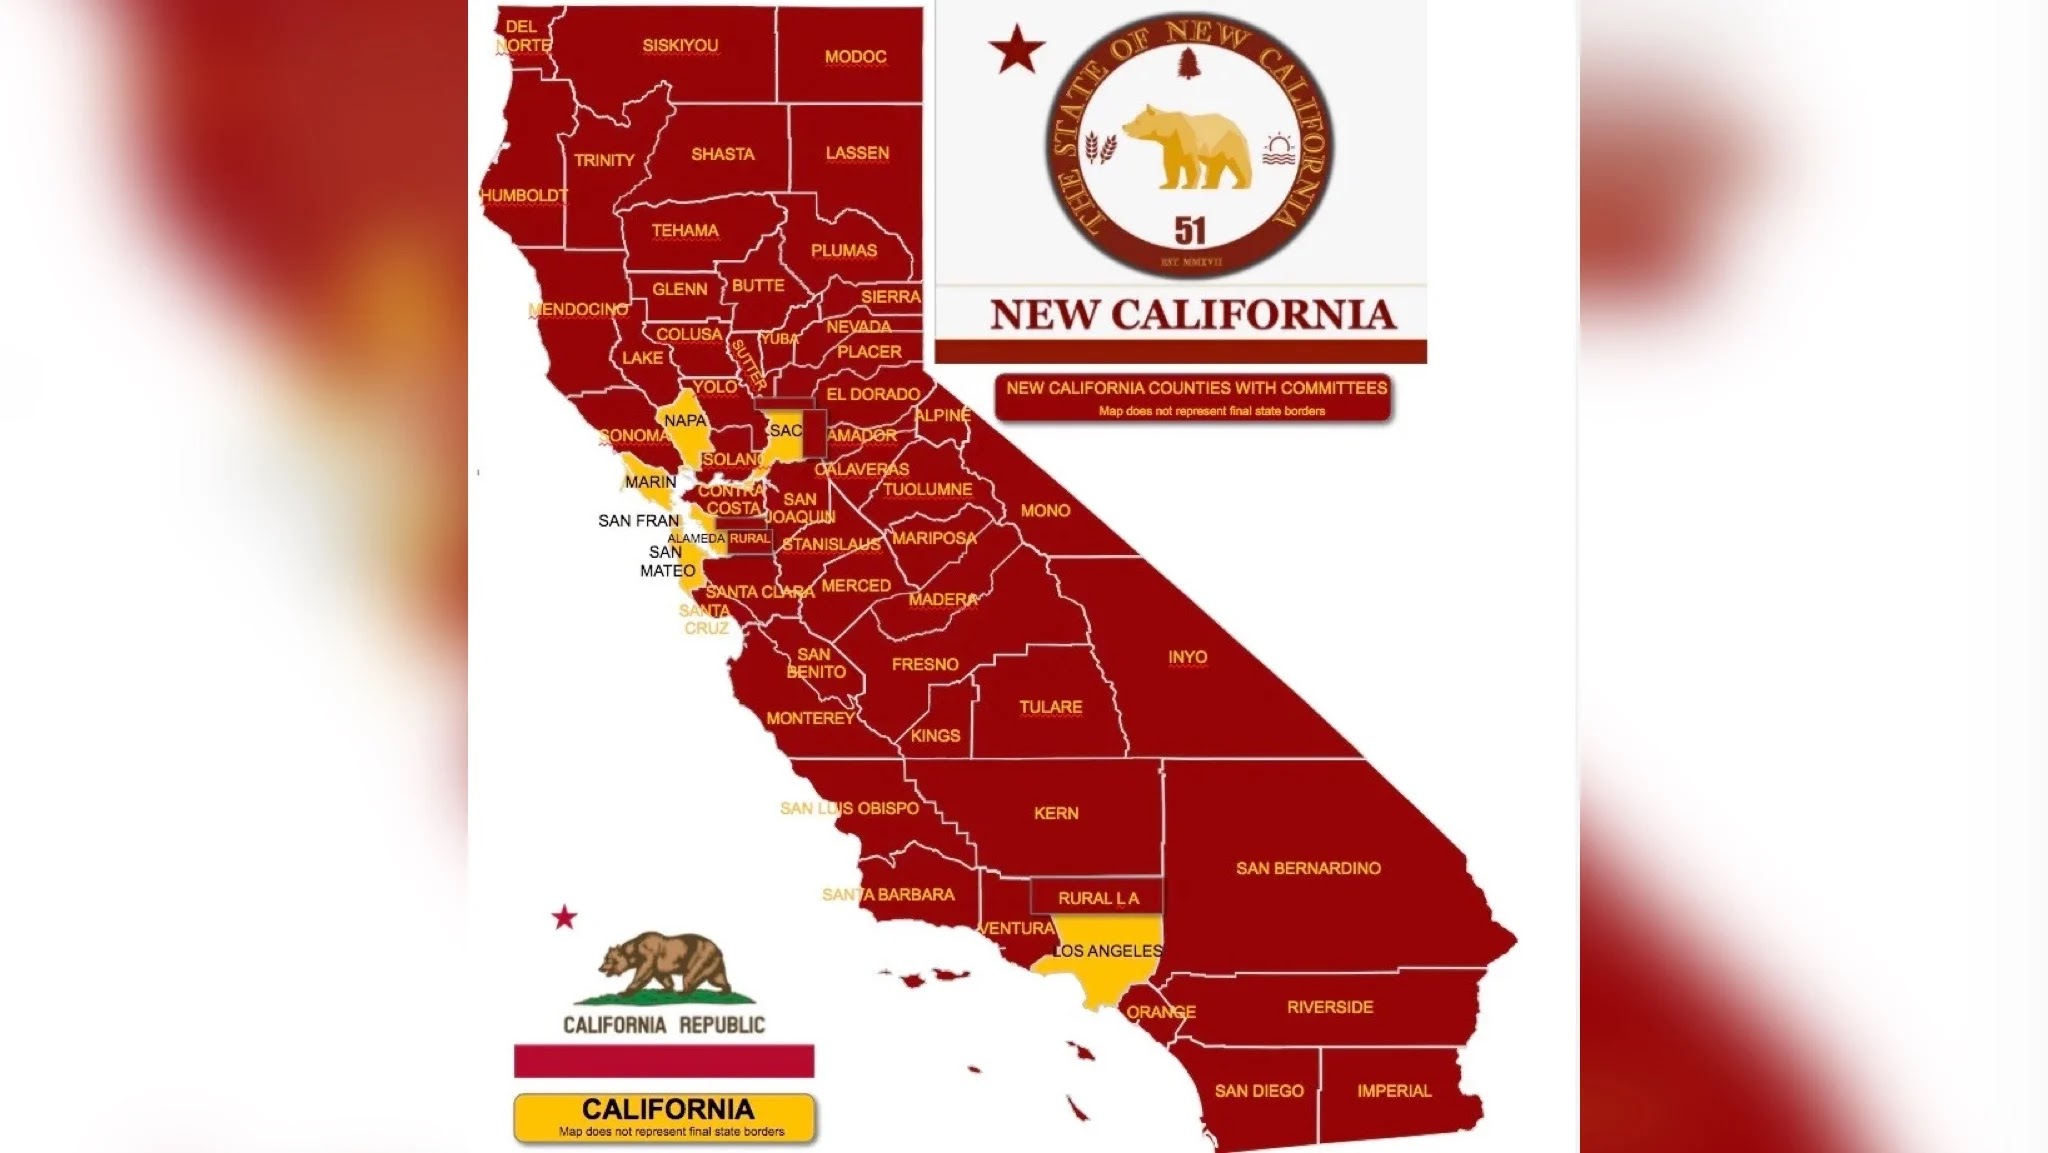 The Process of the Formation of the State of New California Is Well Under Way